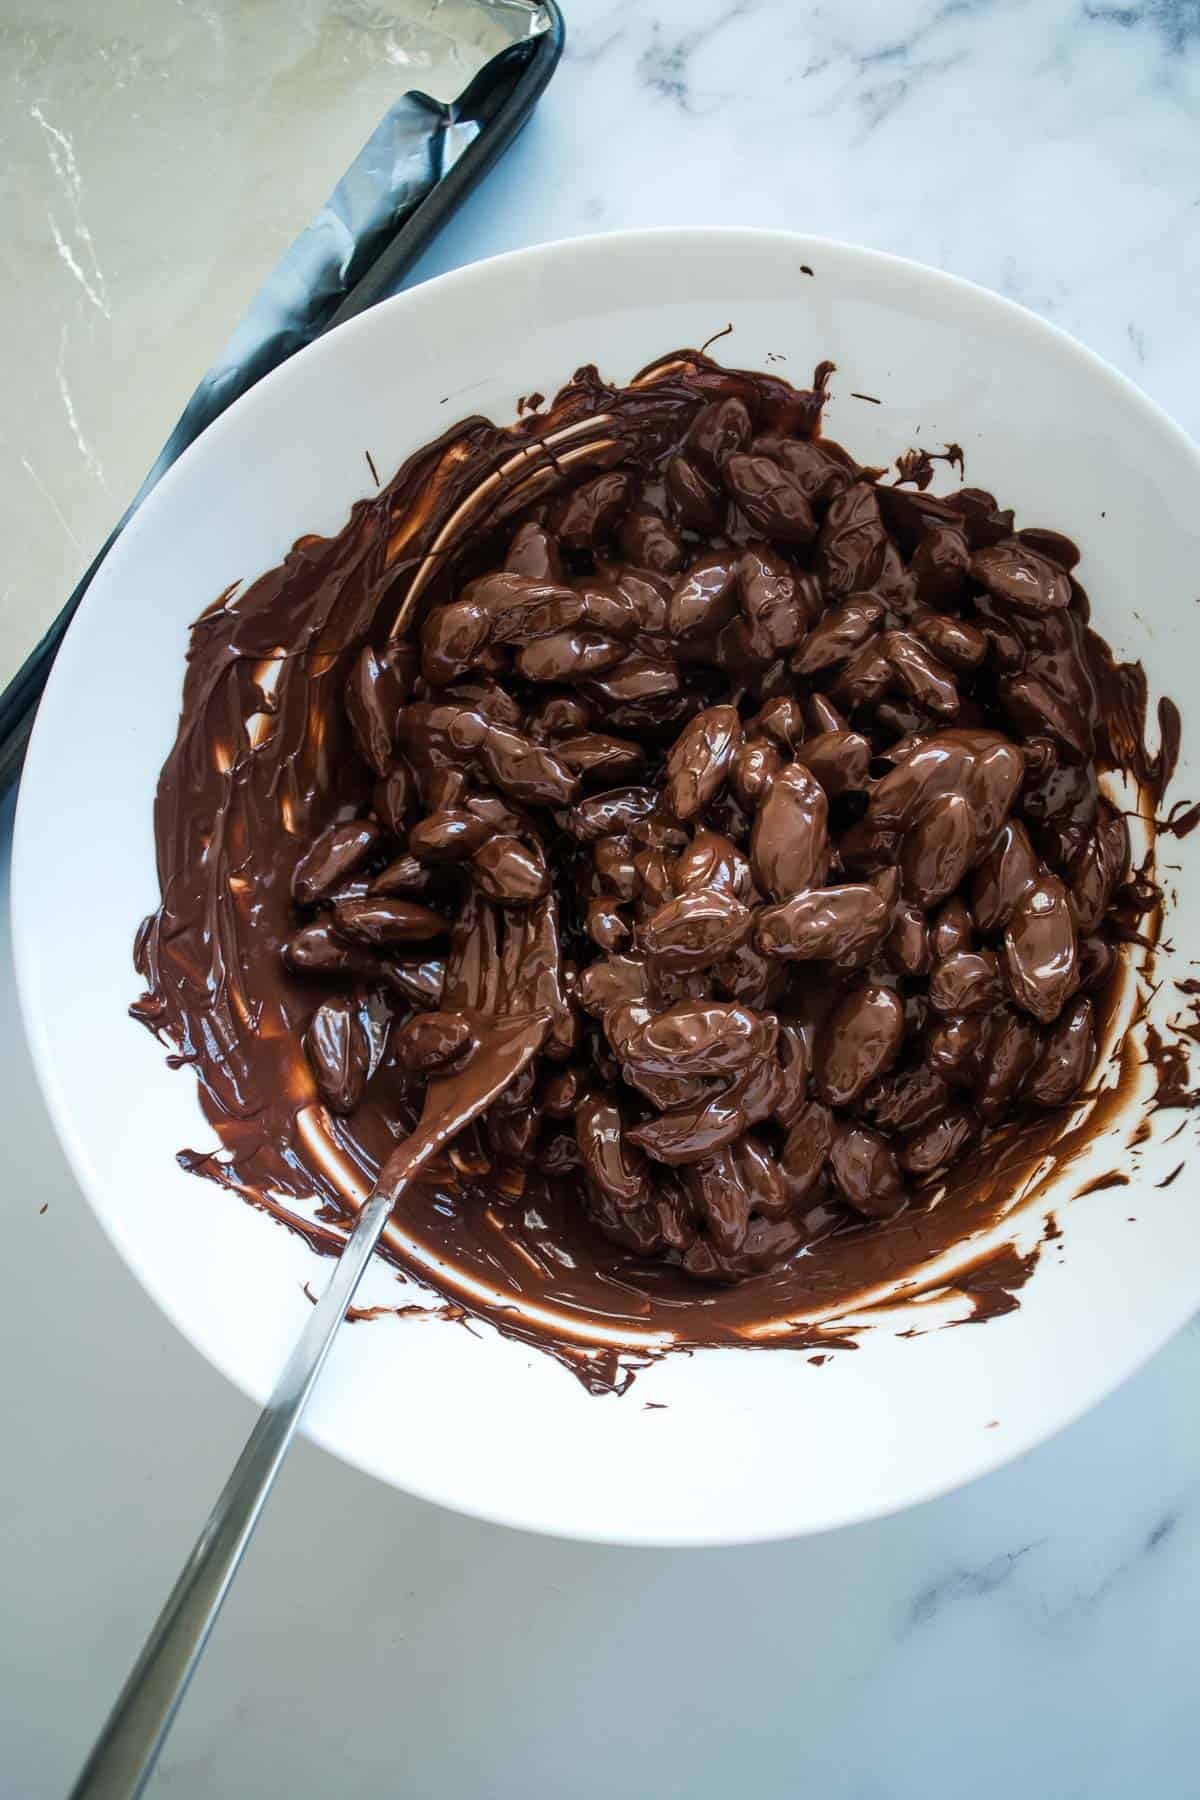 Melted chocolate and almonds in a bowl.